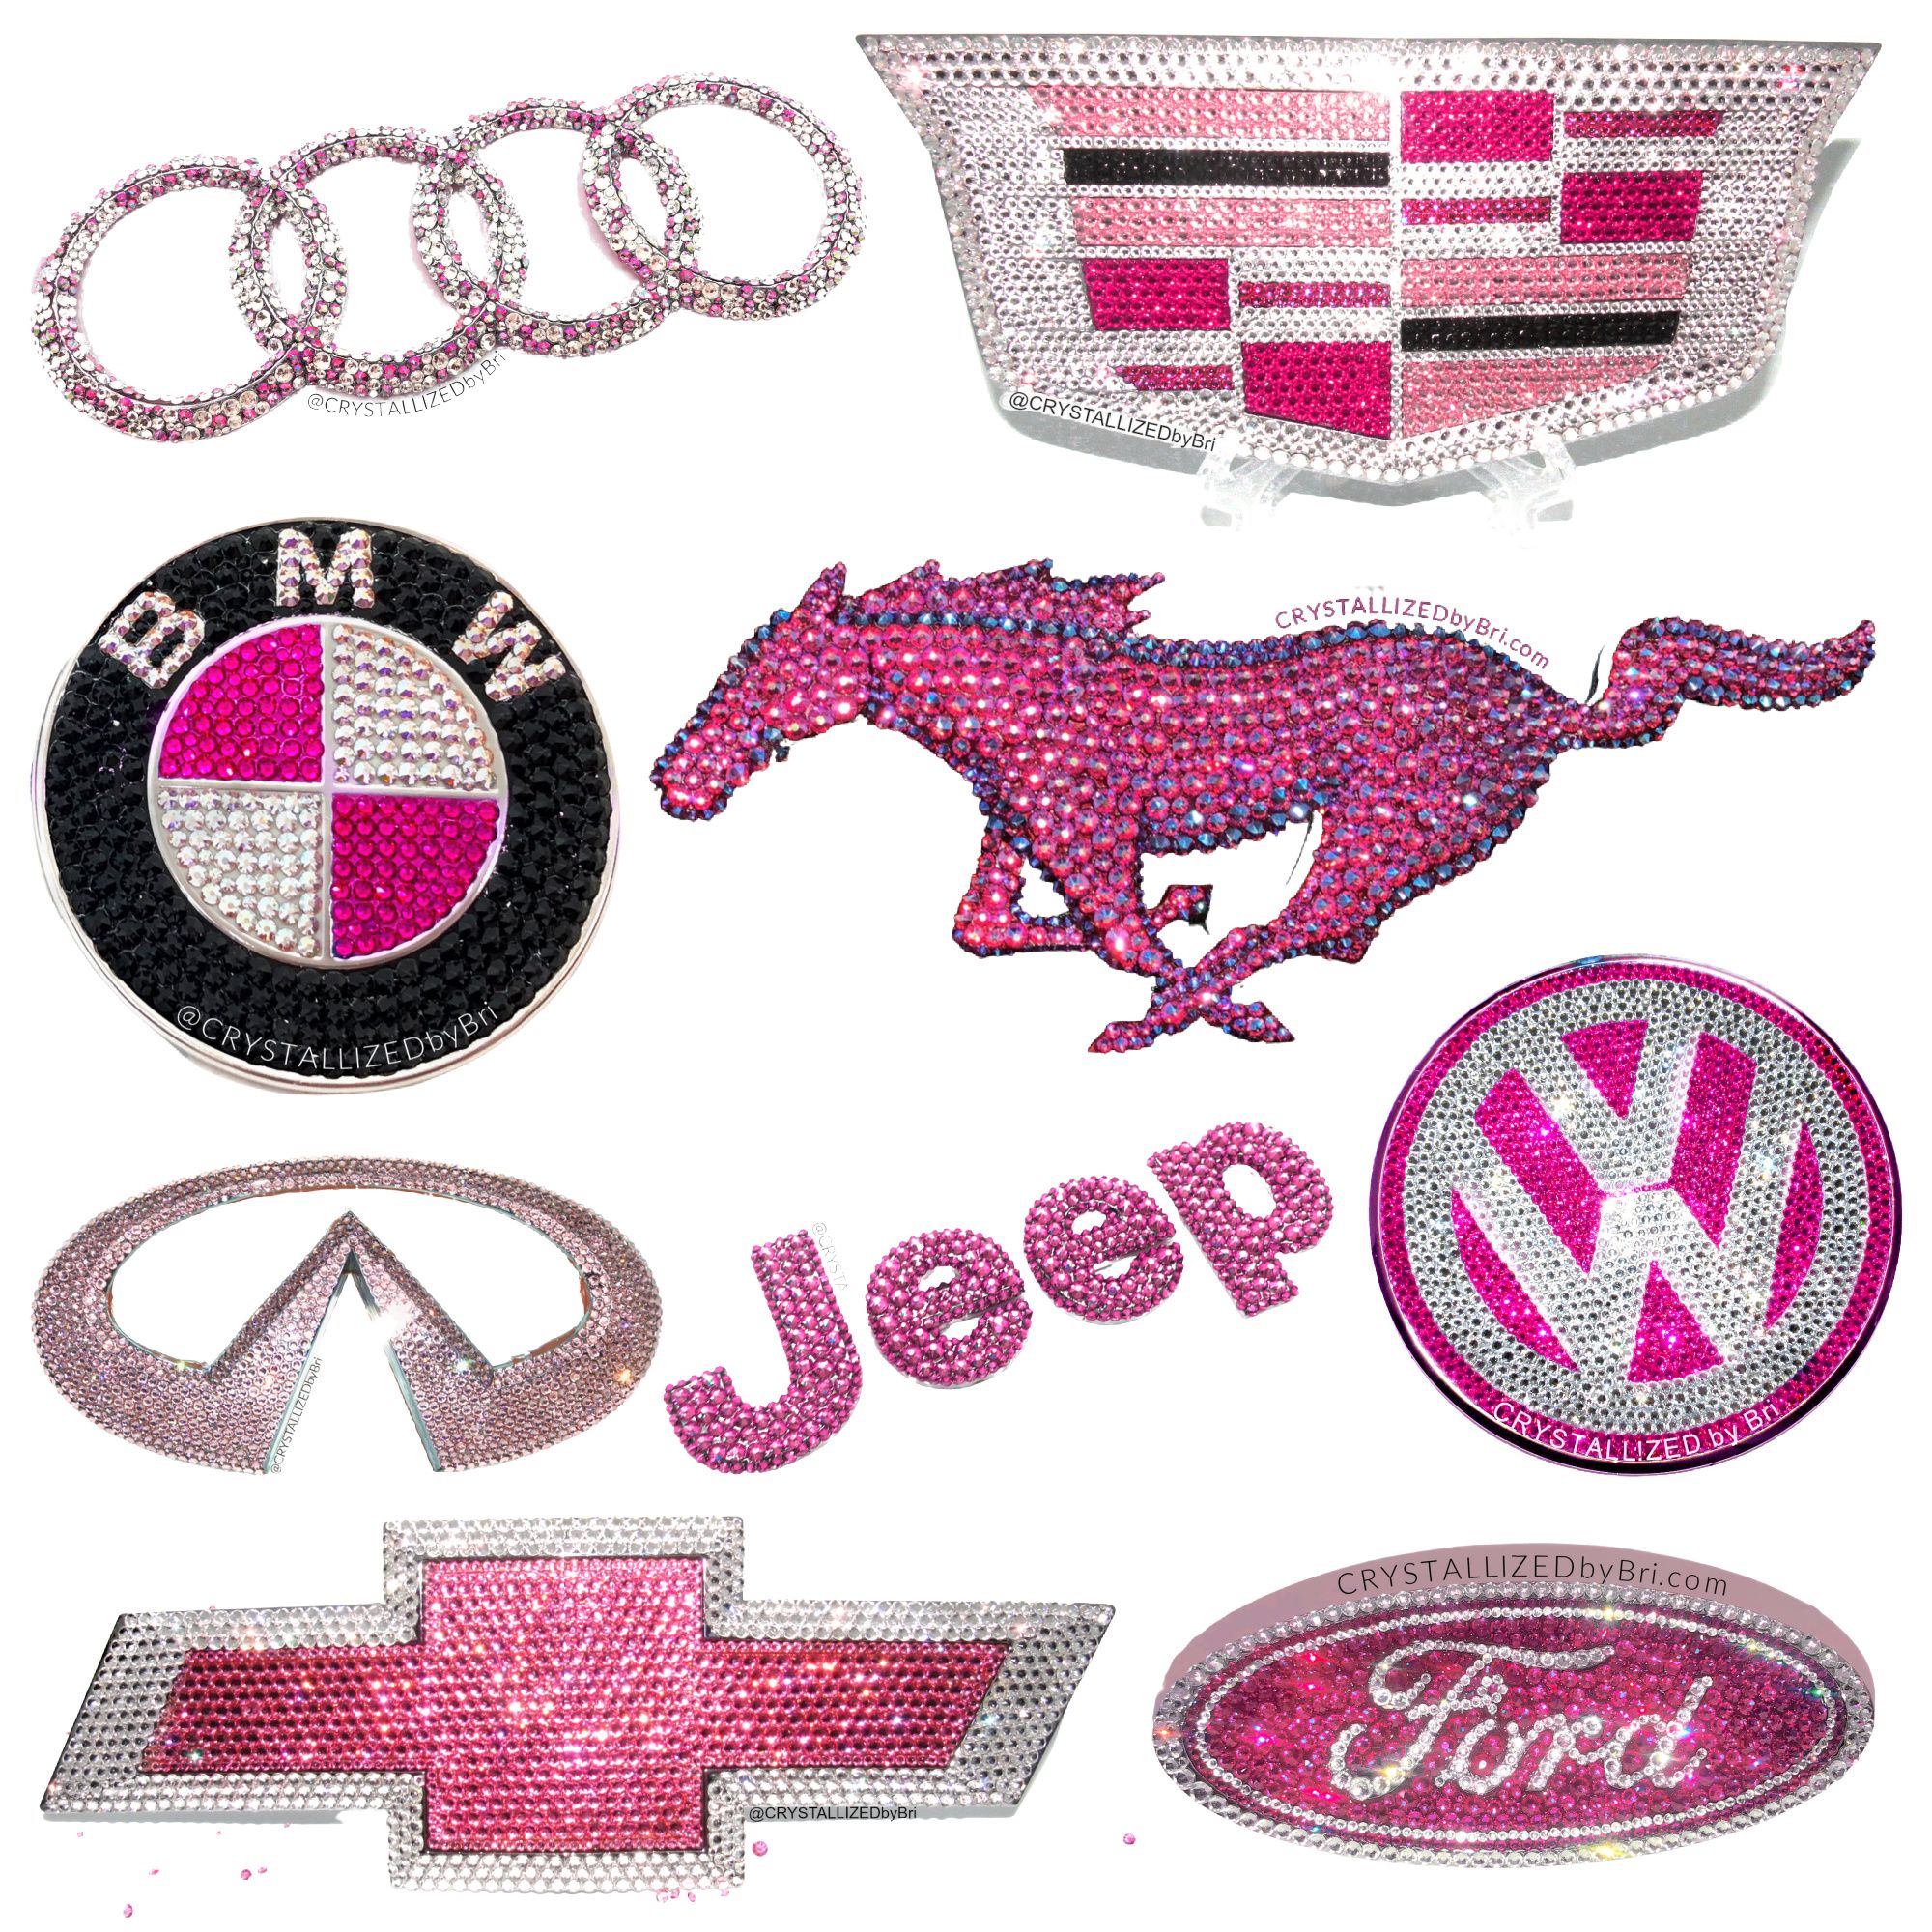 Hand Made Pink Crystal Car Emblems! Bedazzled Any Make Model Year Bling  Badges European by CRYSTALL!ZED by Bri, LLC